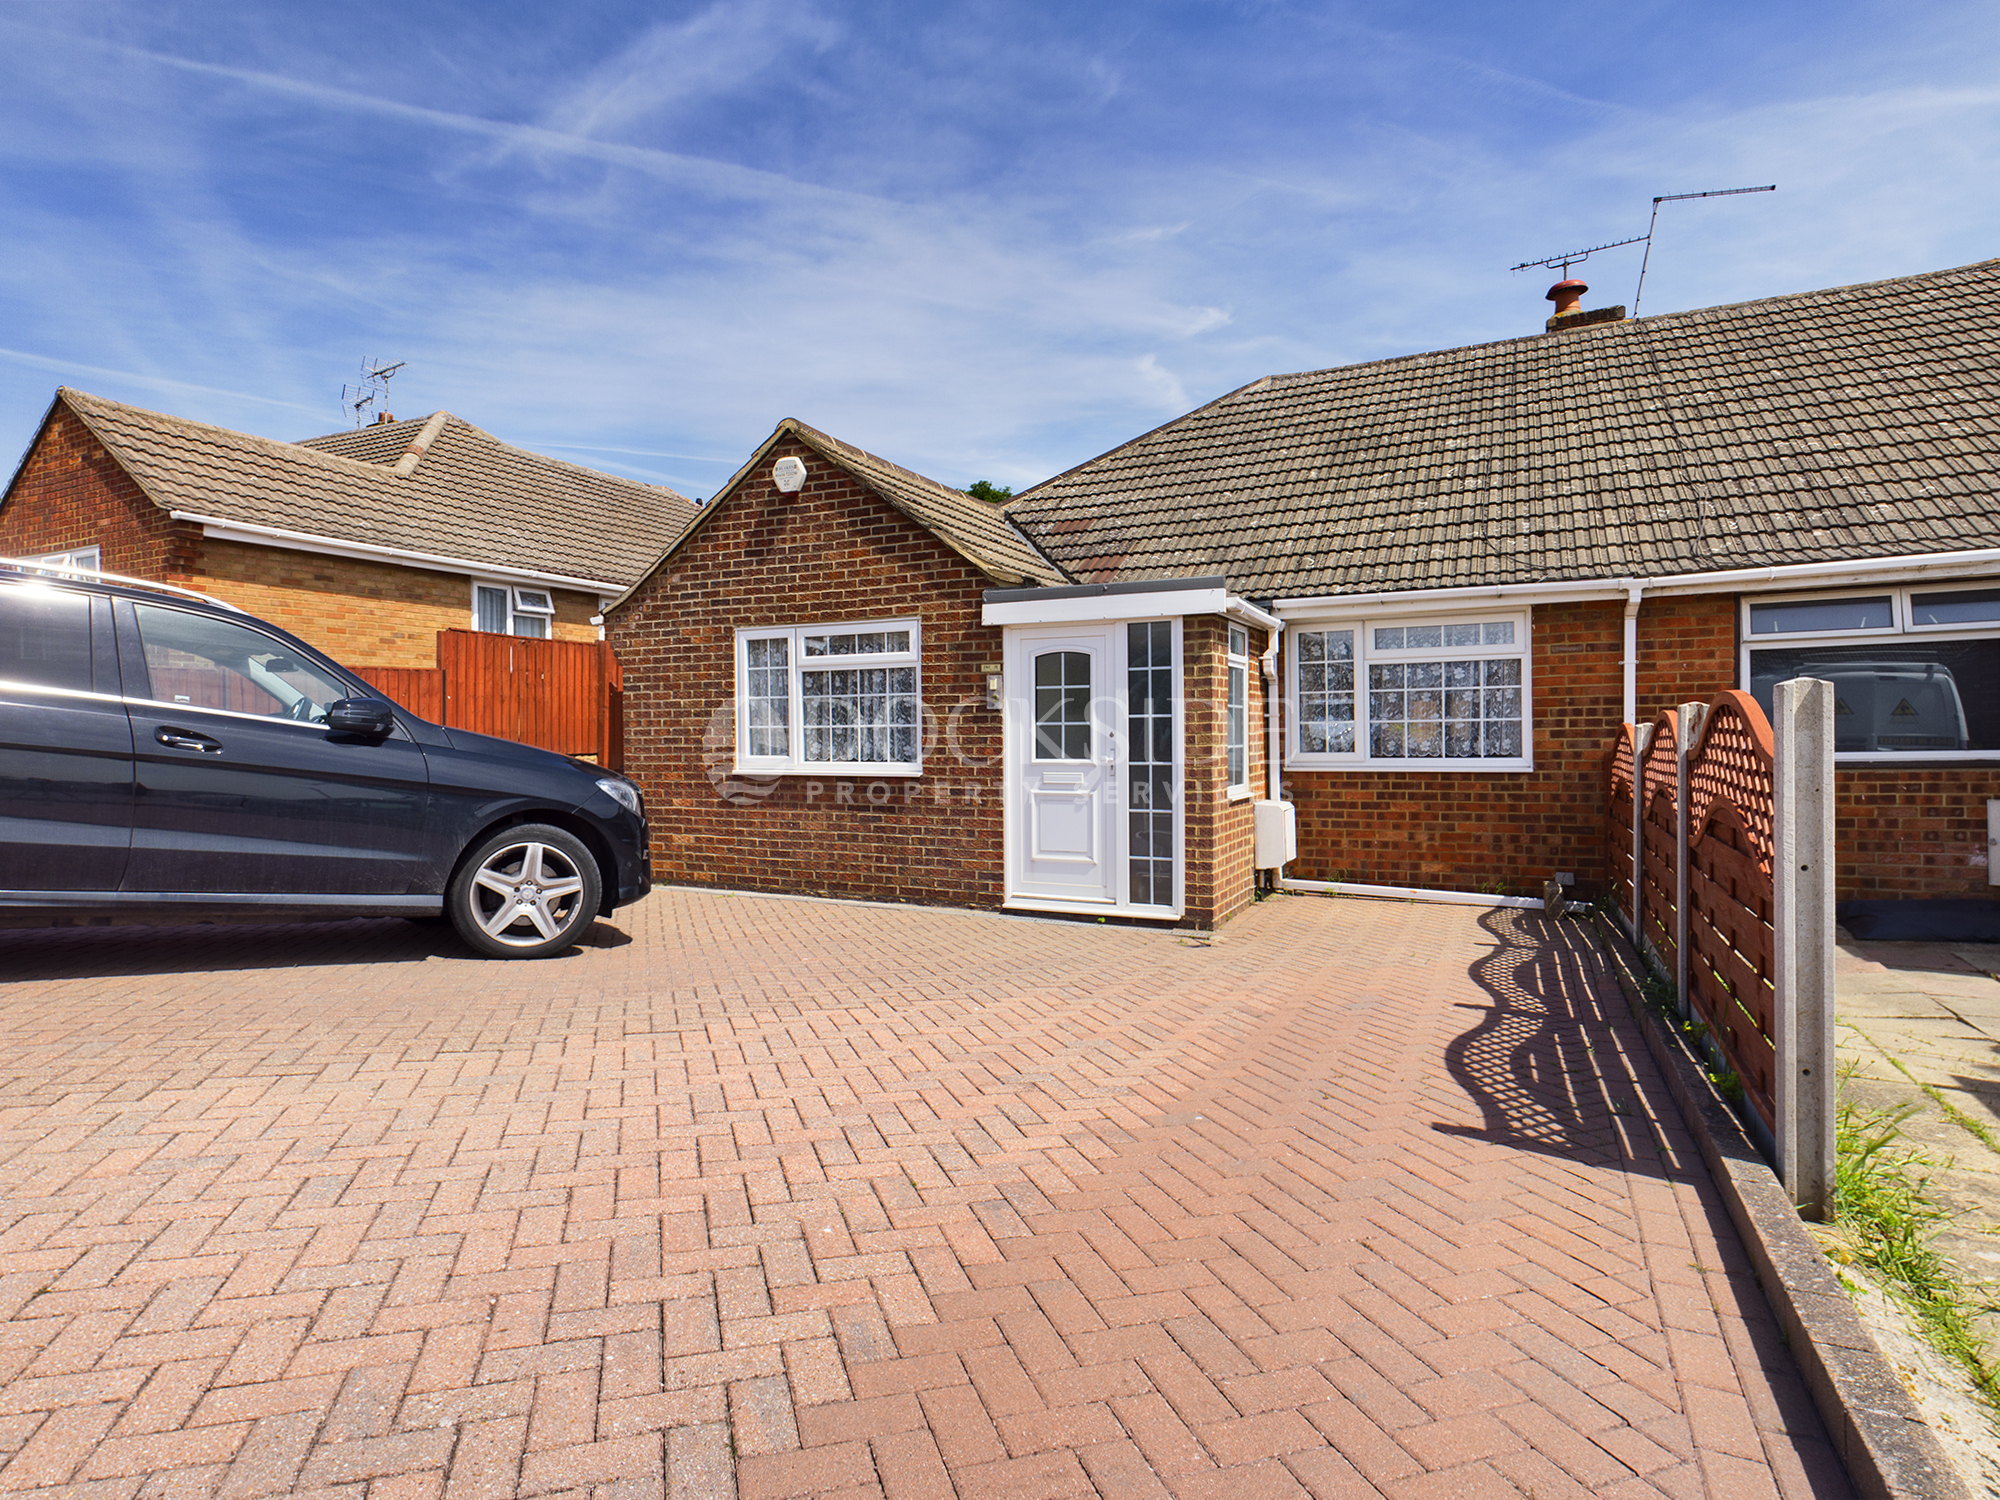 2 bed bungalow for sale in Coombe Road, Rochester, ME3 